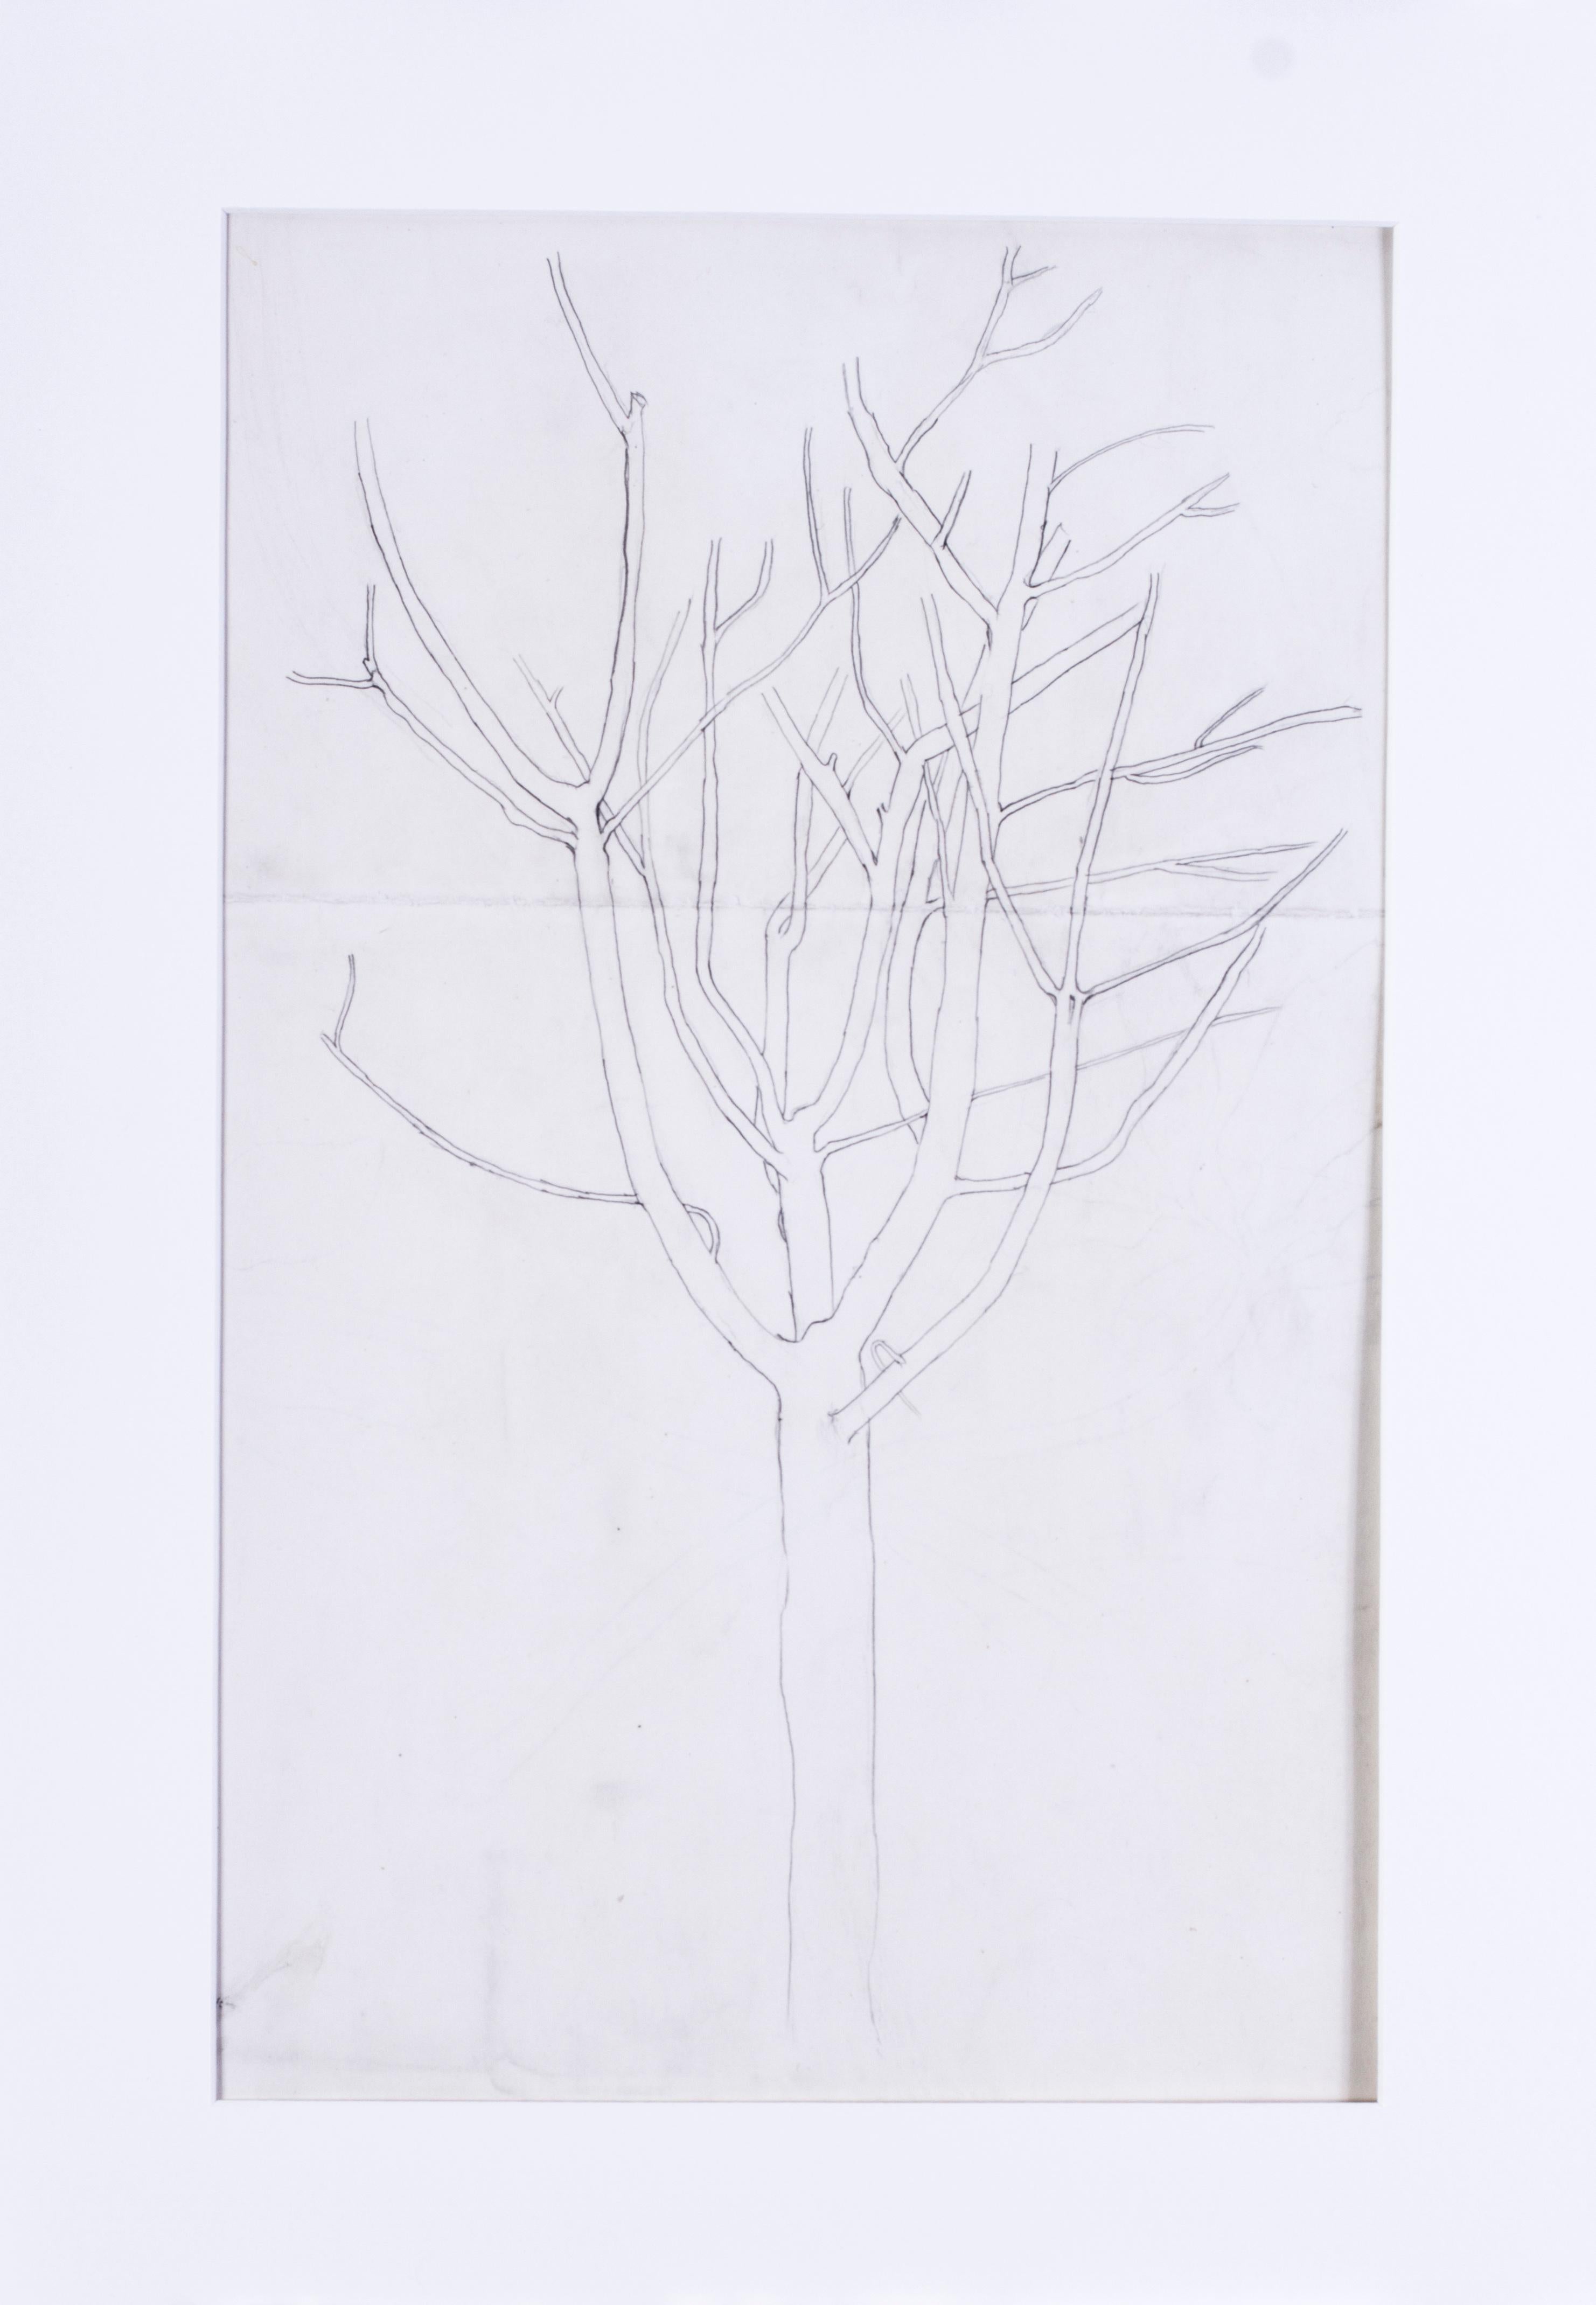 Evelyn De Morgan (British, 1855 – 1919)
Study of a tree
pencil on paper
19 x 11.3/4 in. (48.2 x 30 cm.)
Provenance: The Clayton-Stamm Collection.  
Dominic Winter, Cirencester, 8th November 2018, lot 464


Evelyn de Morgan is identified as one of